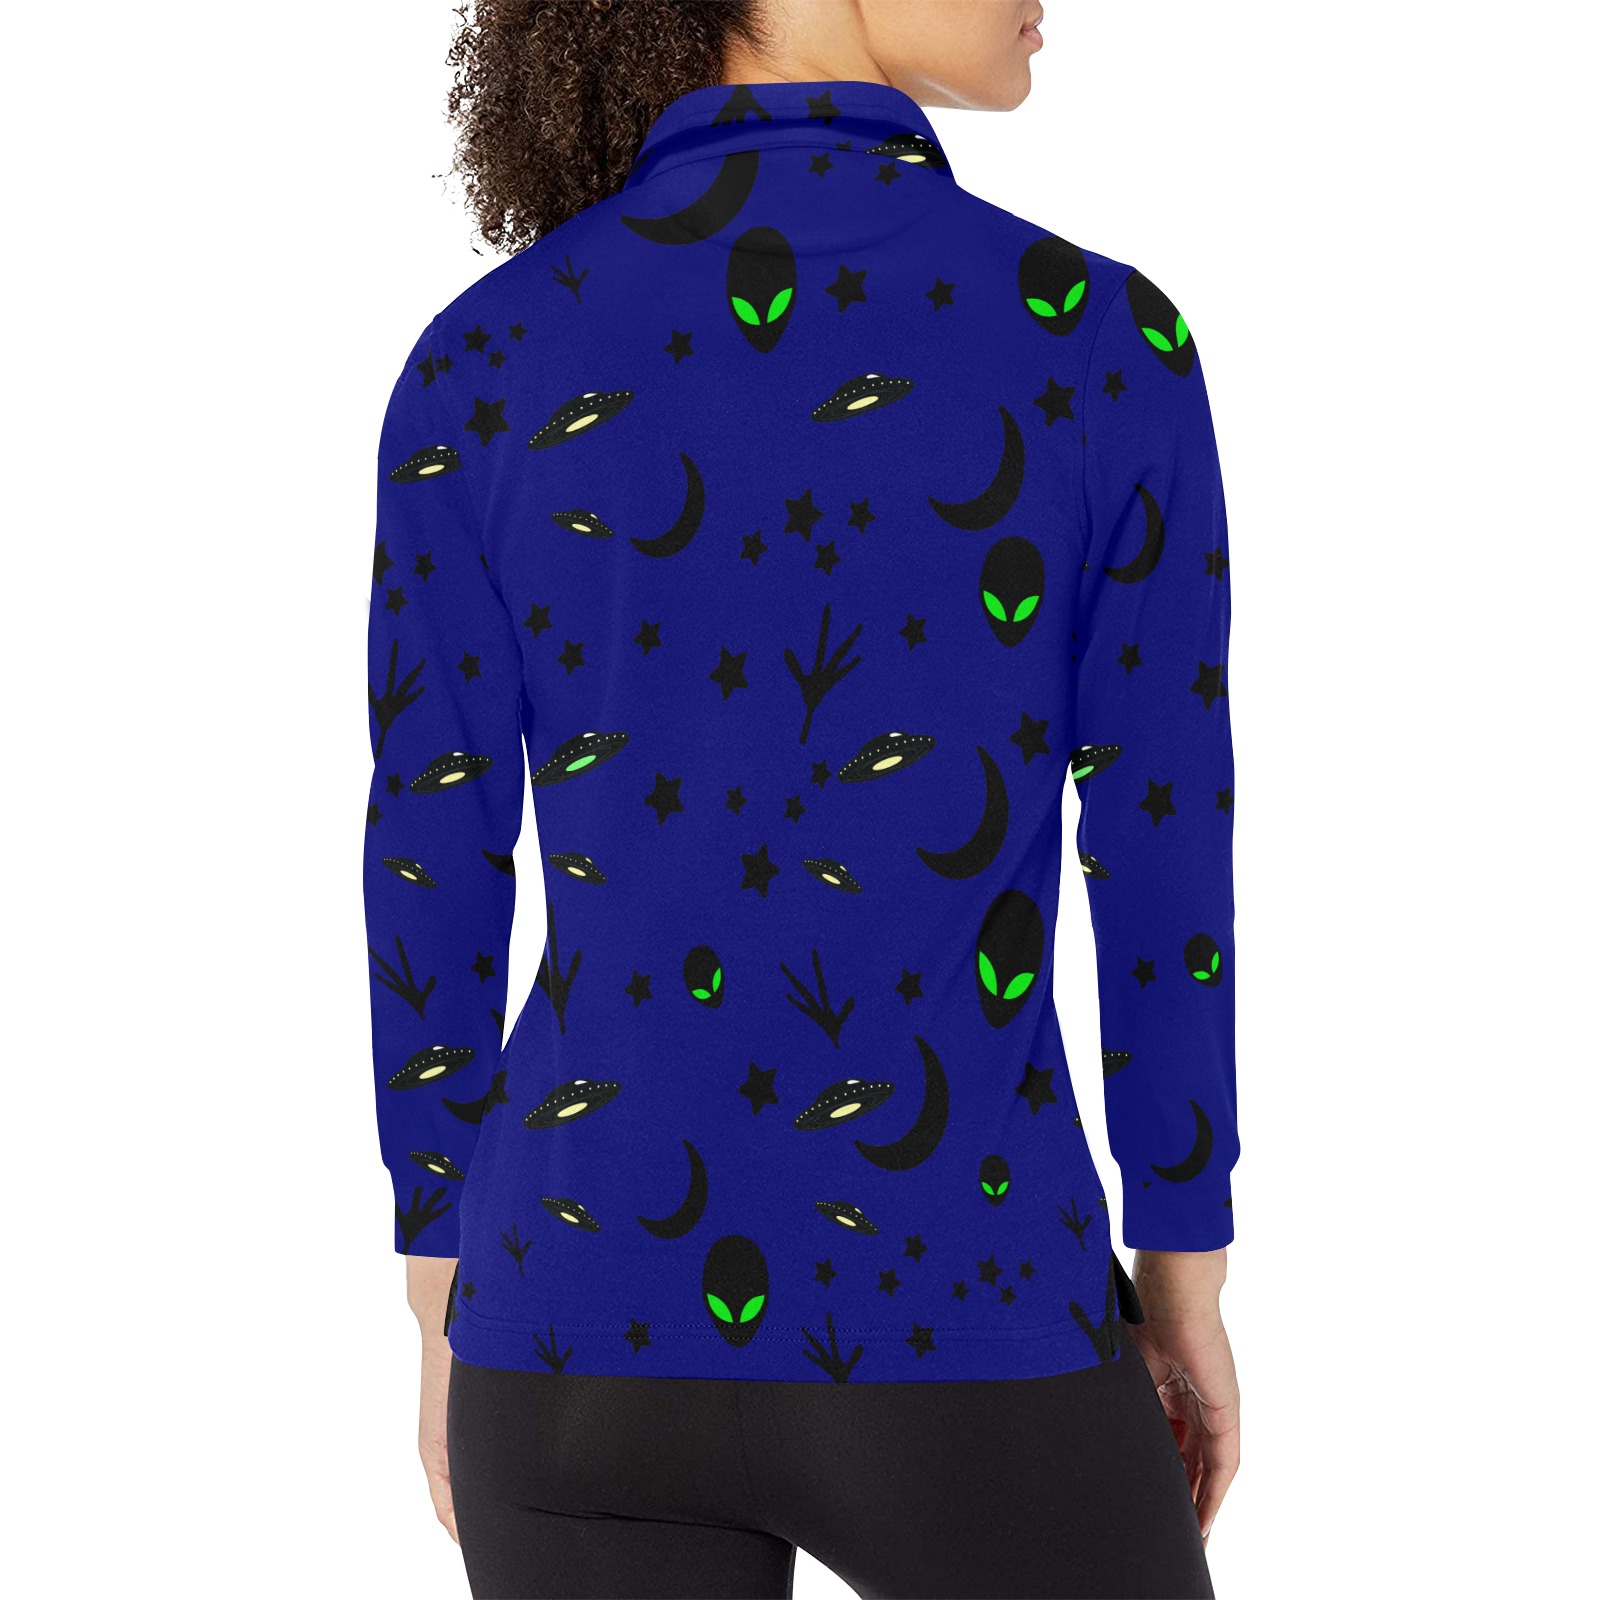 Aliens and Spaceships on Blue Women's Long Sleeve Polo Shirt (Model T73)